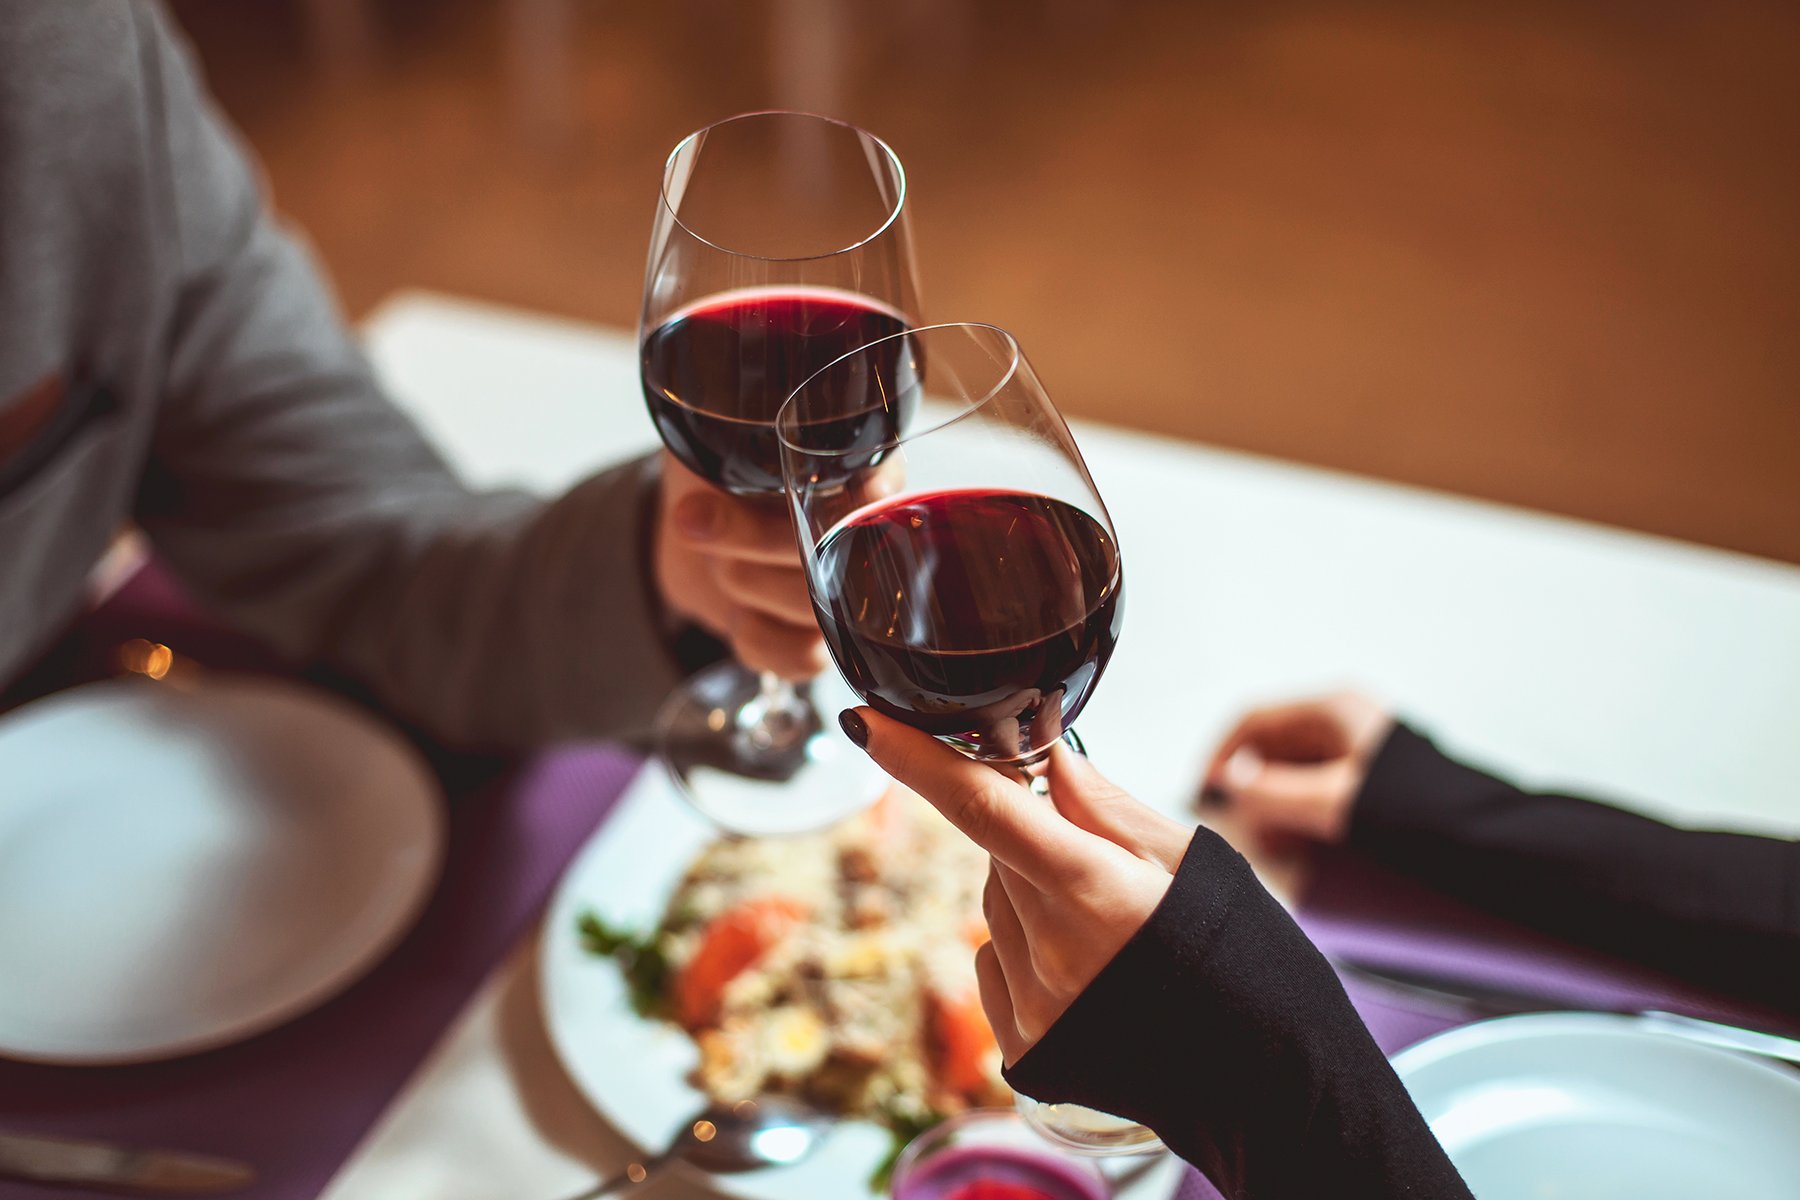 Couple toasting with wine glasses over valentines dinner in restaurant